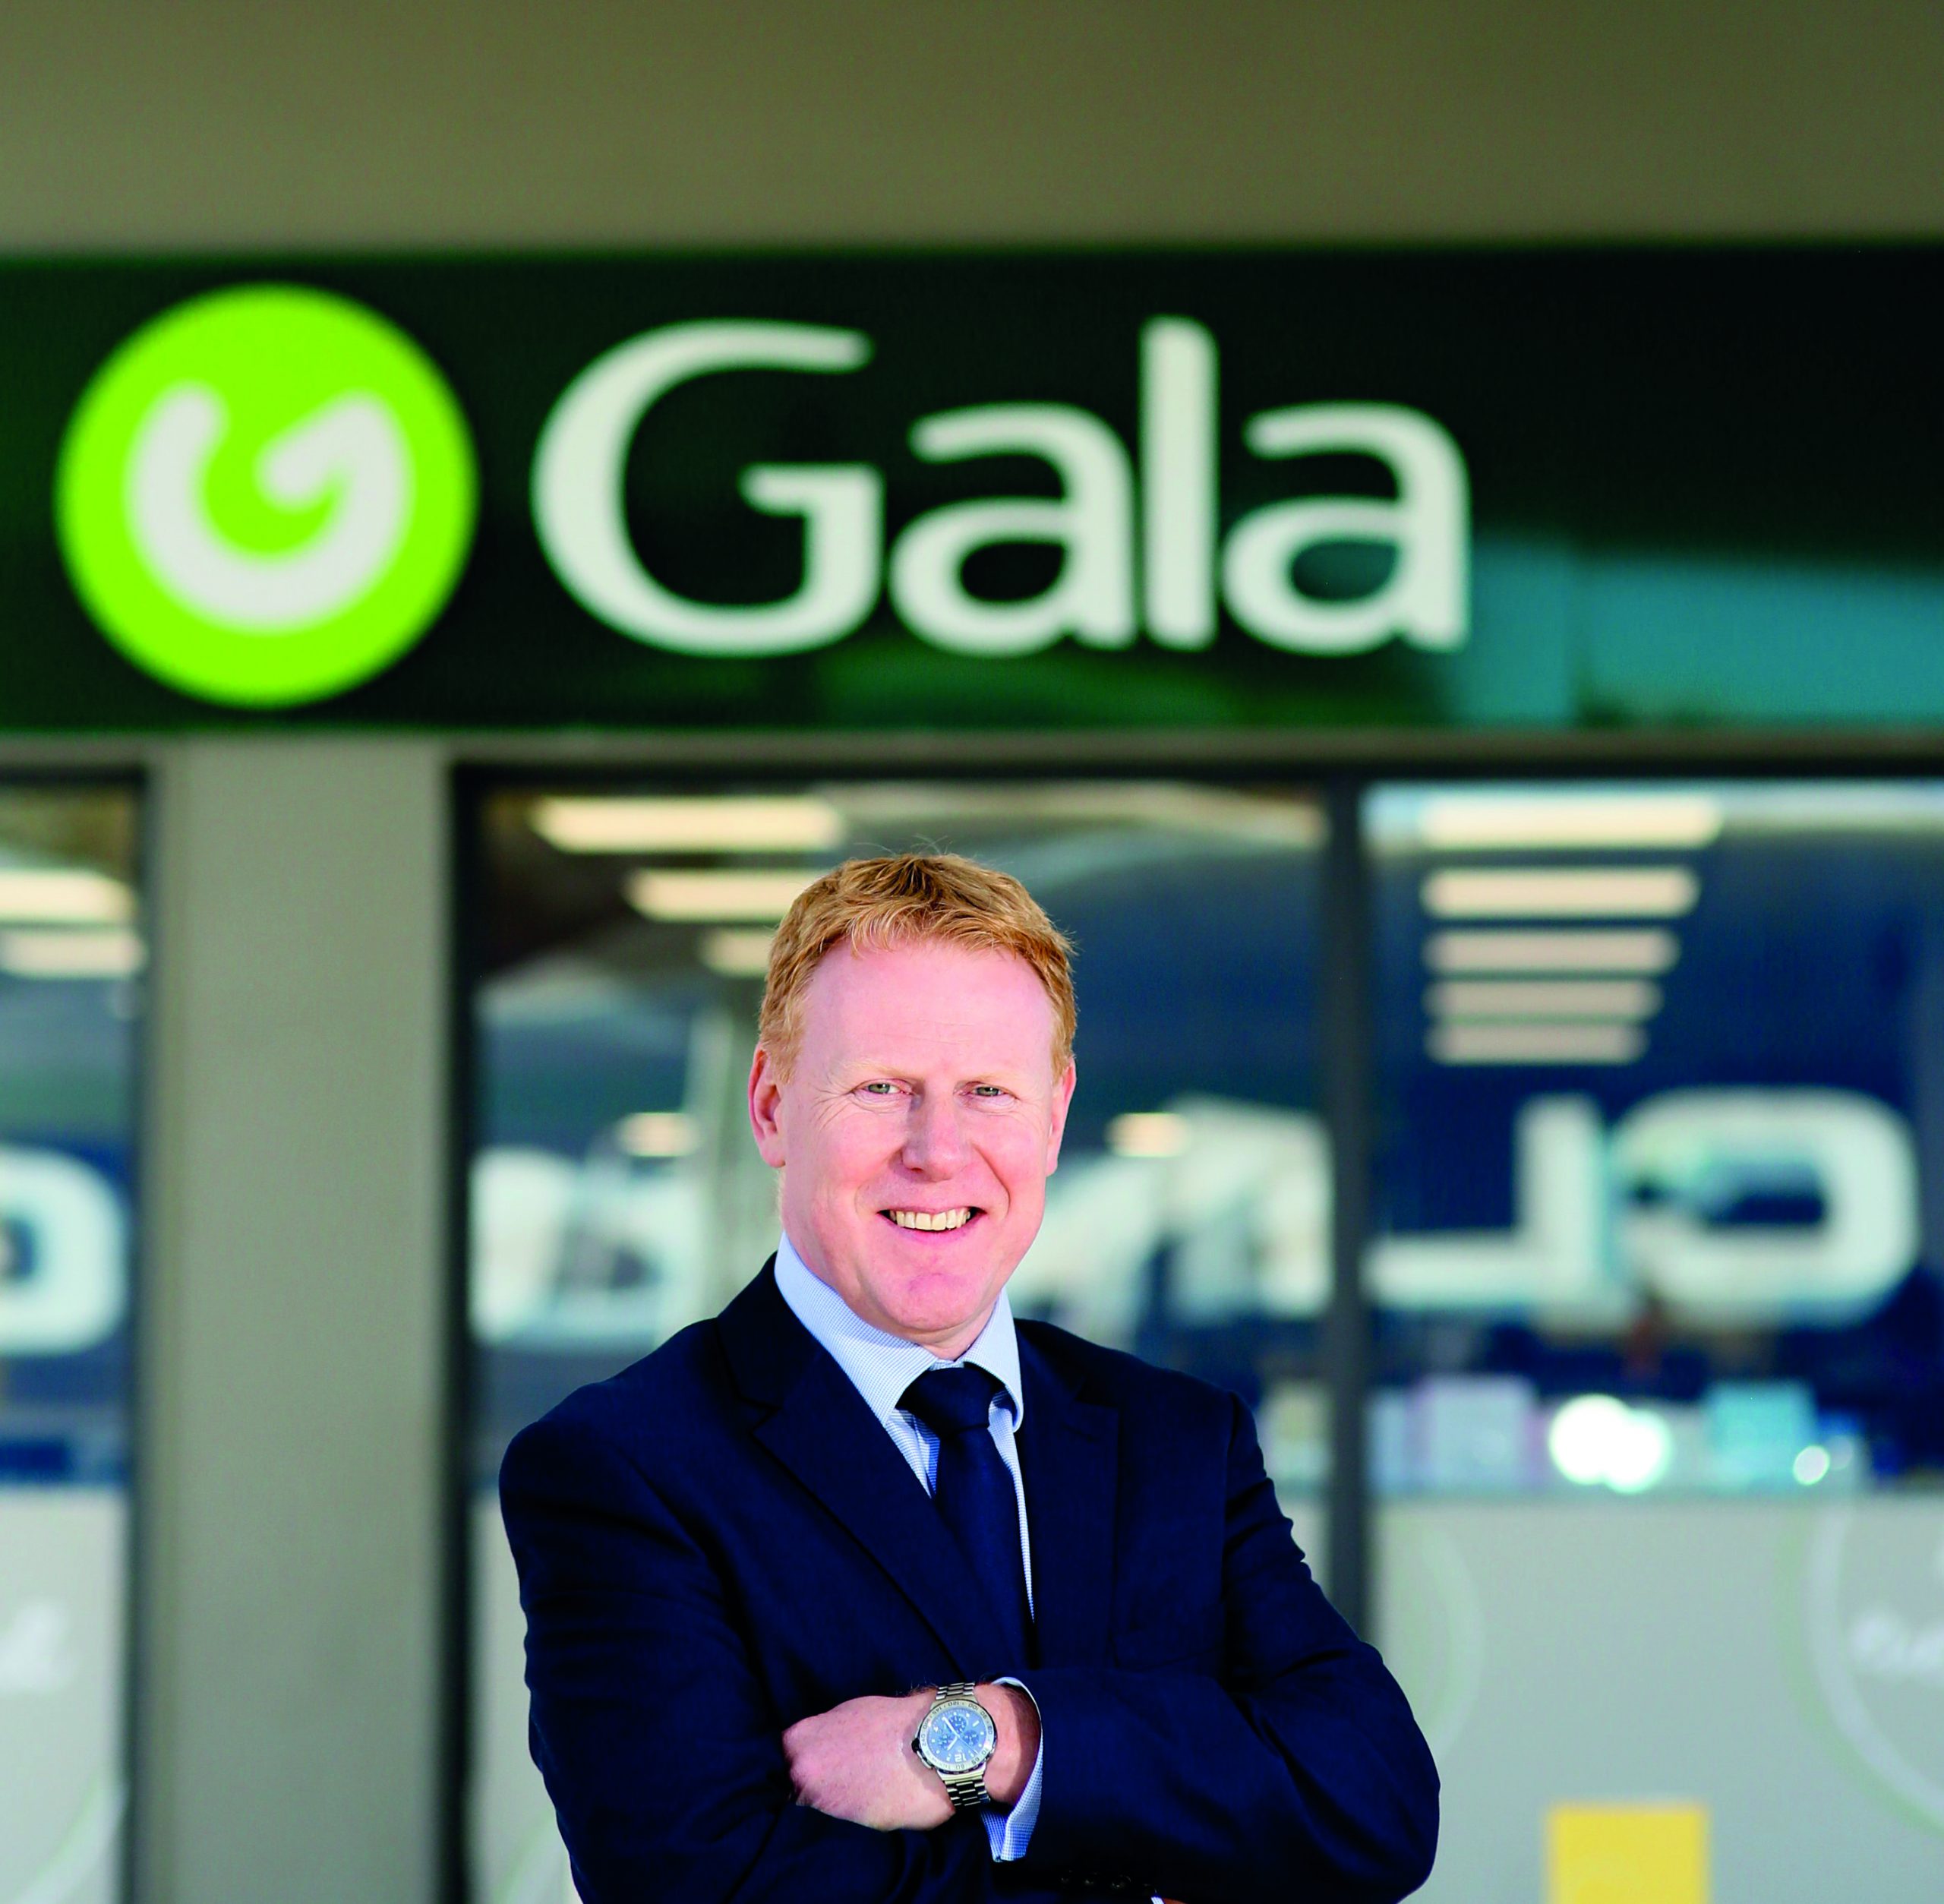 Trade comment – Gary Desmond CEO of Gala Group